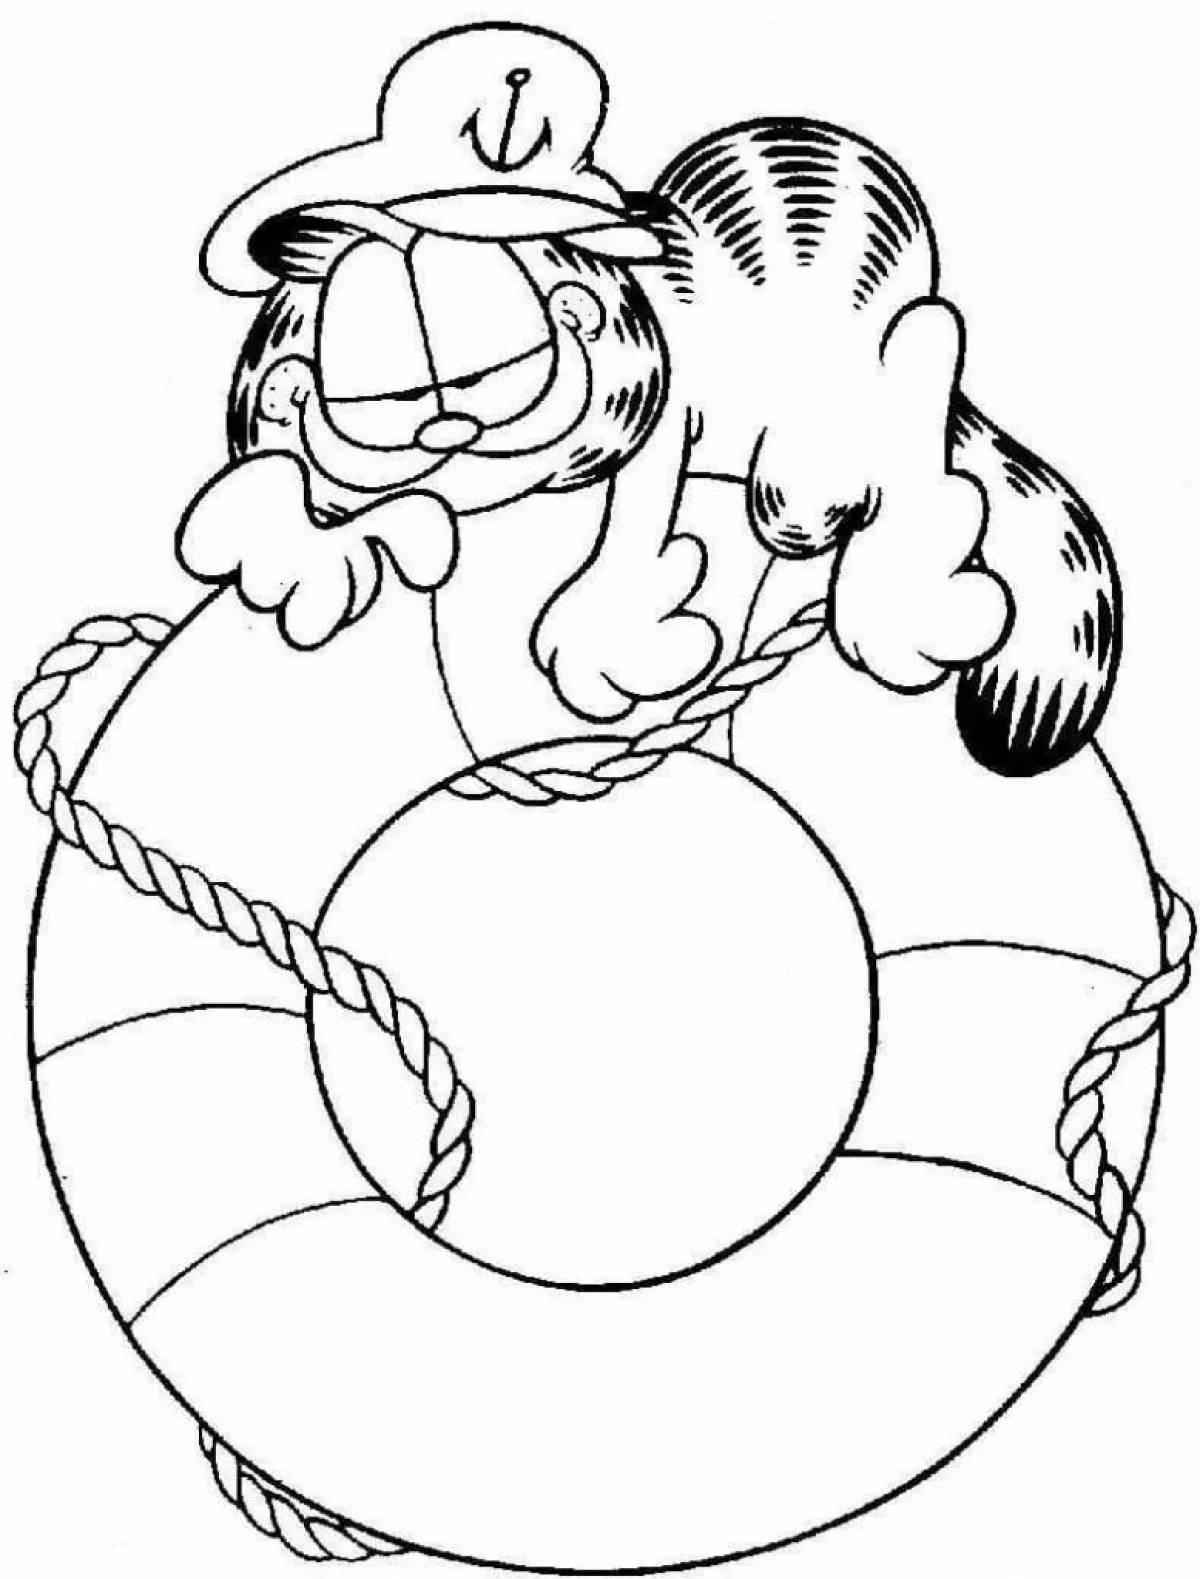 Coloring page life buoy for kids